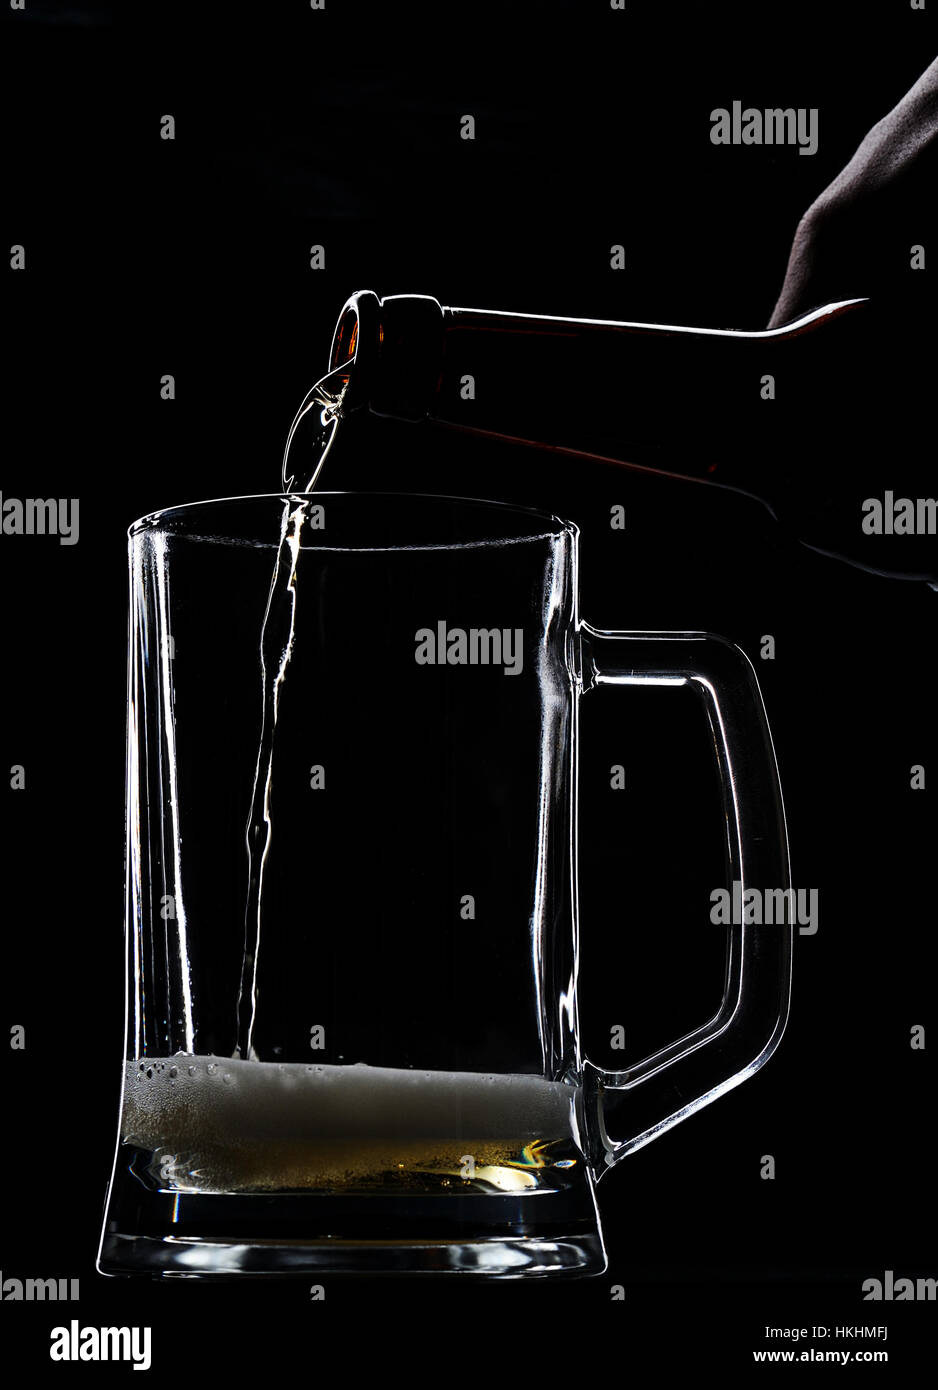 Serving beer in empty glass from bottle on black Stock Photo